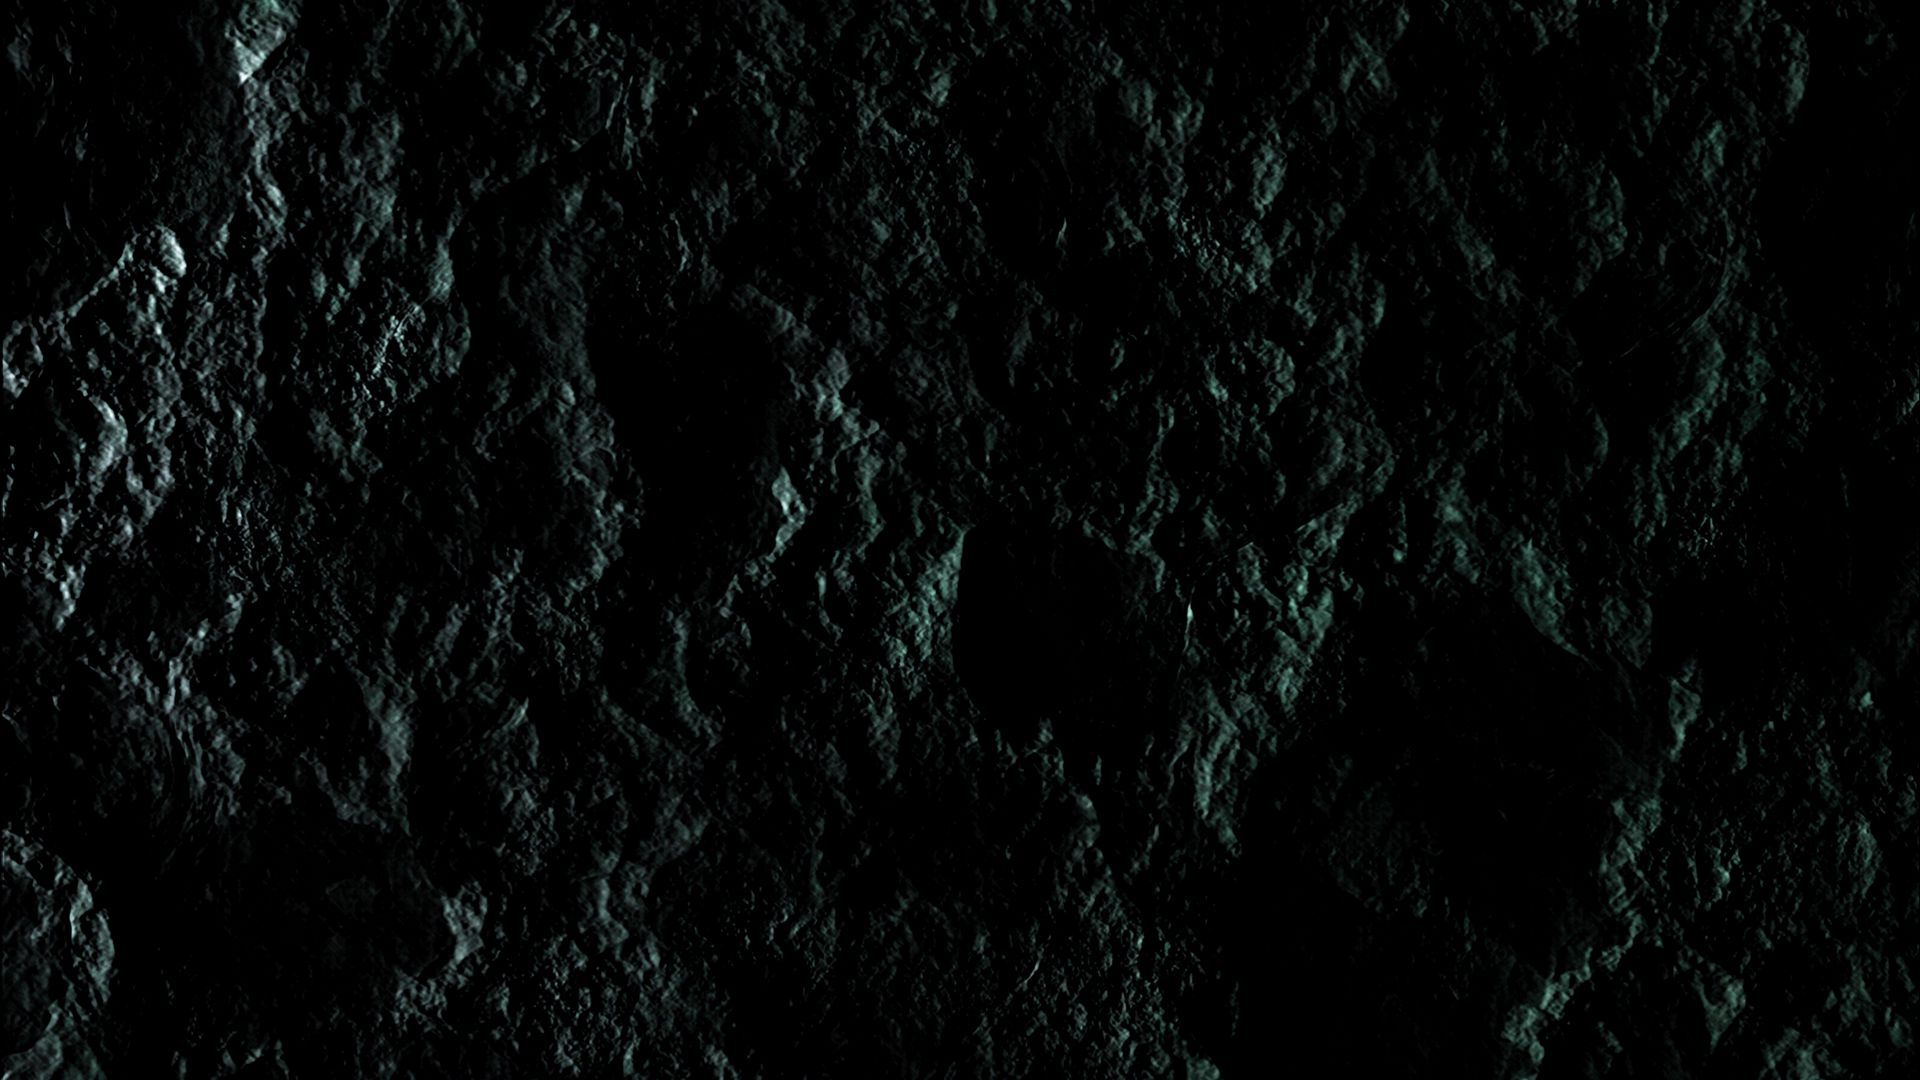 Download wallpaper 1920x1080 topography, roughness, dark, texture full hd, hdtv, fhd, 1080p HD background